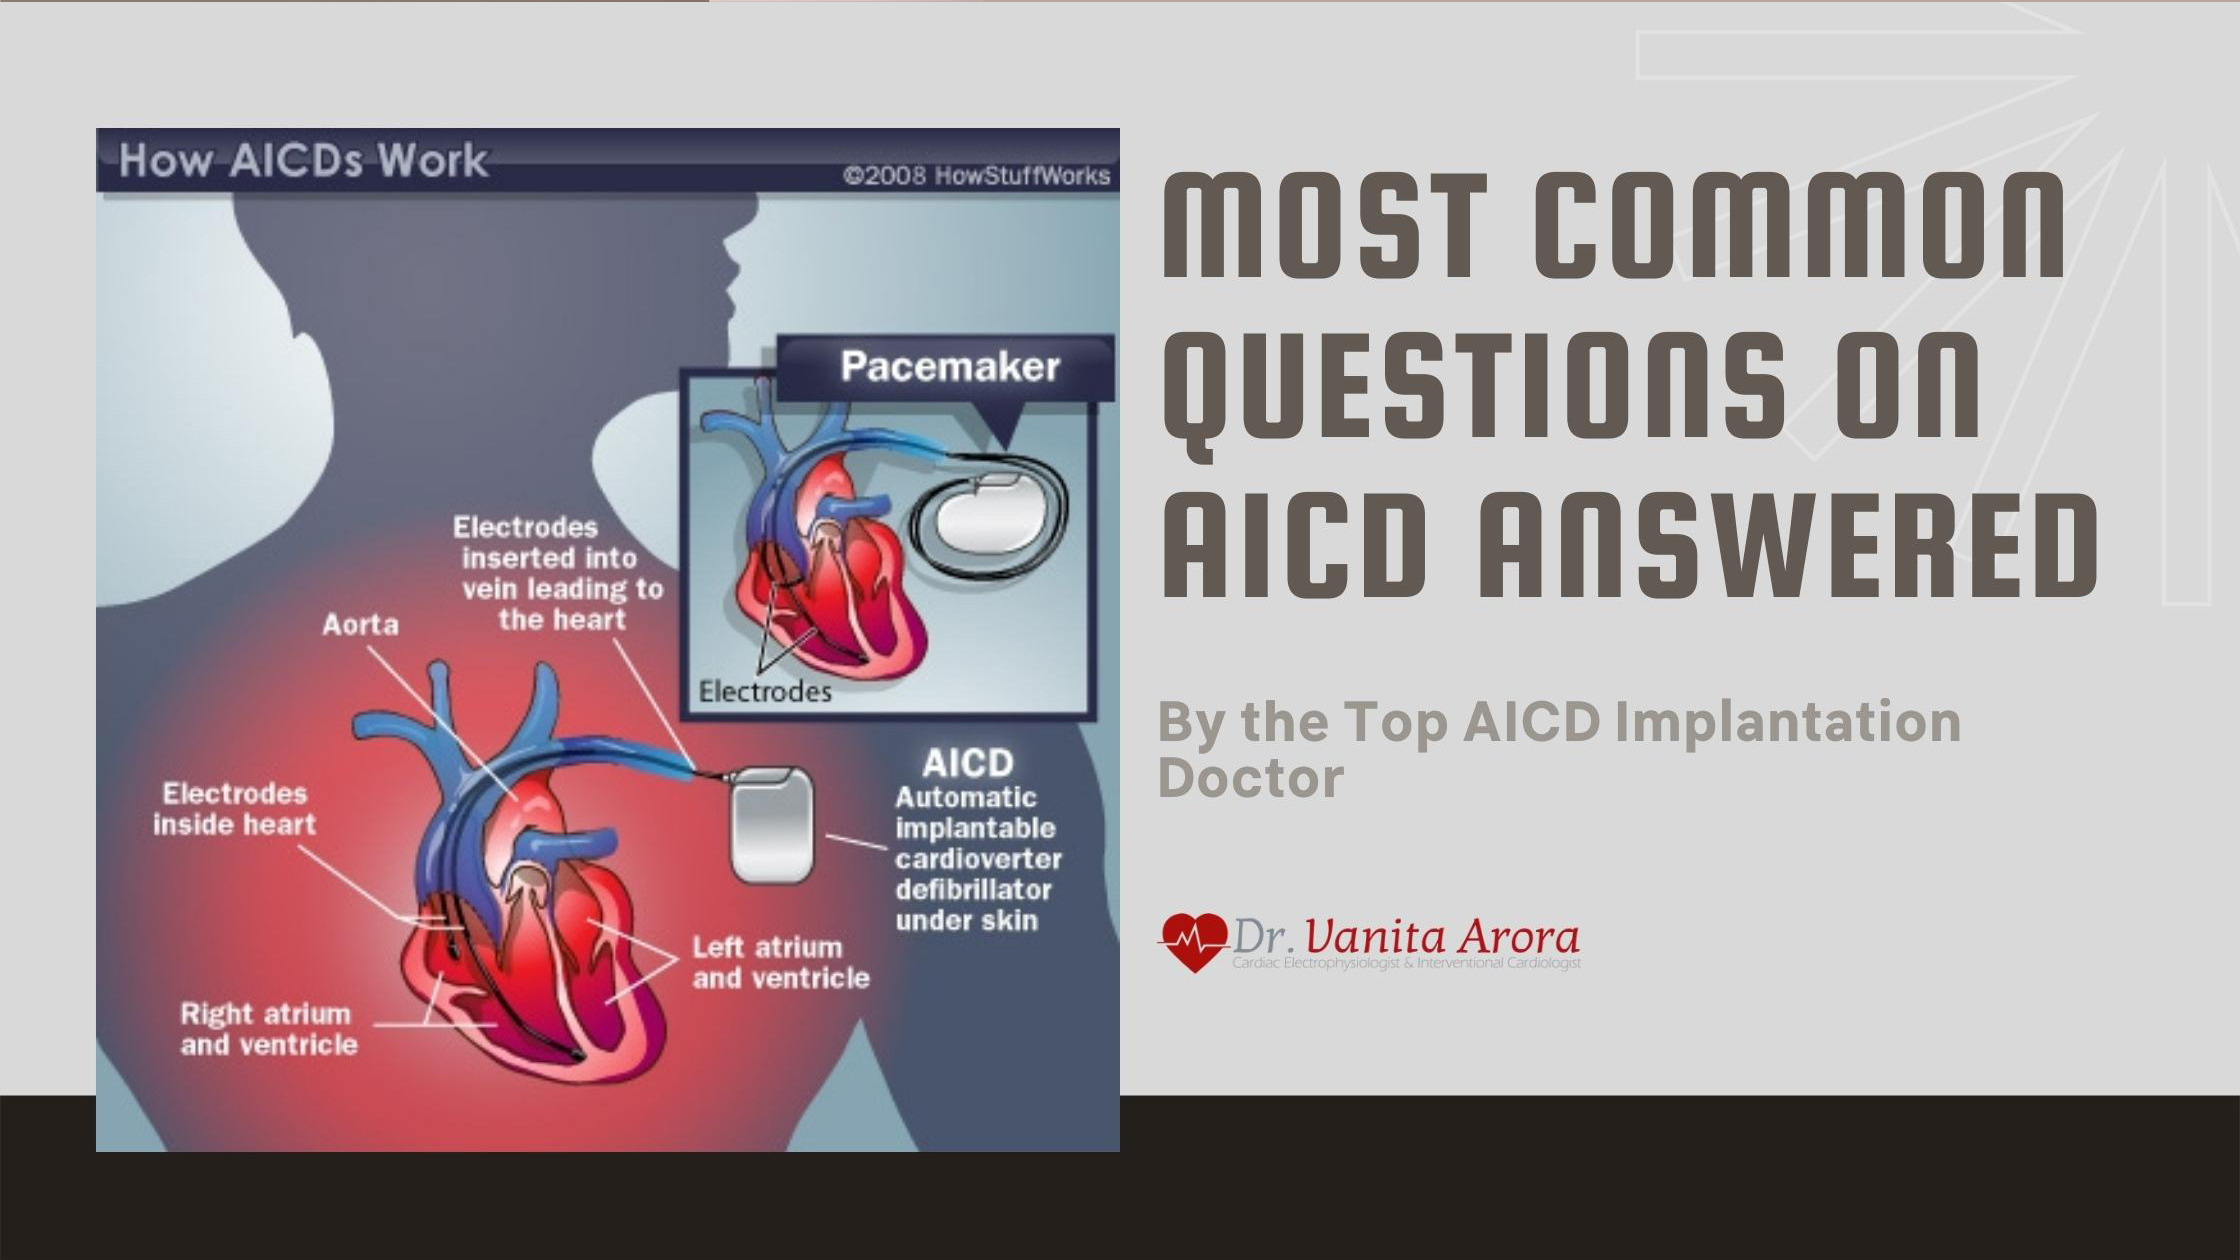 Most Common Questions on AICD Answered by the Top AICD Implantation Doctor